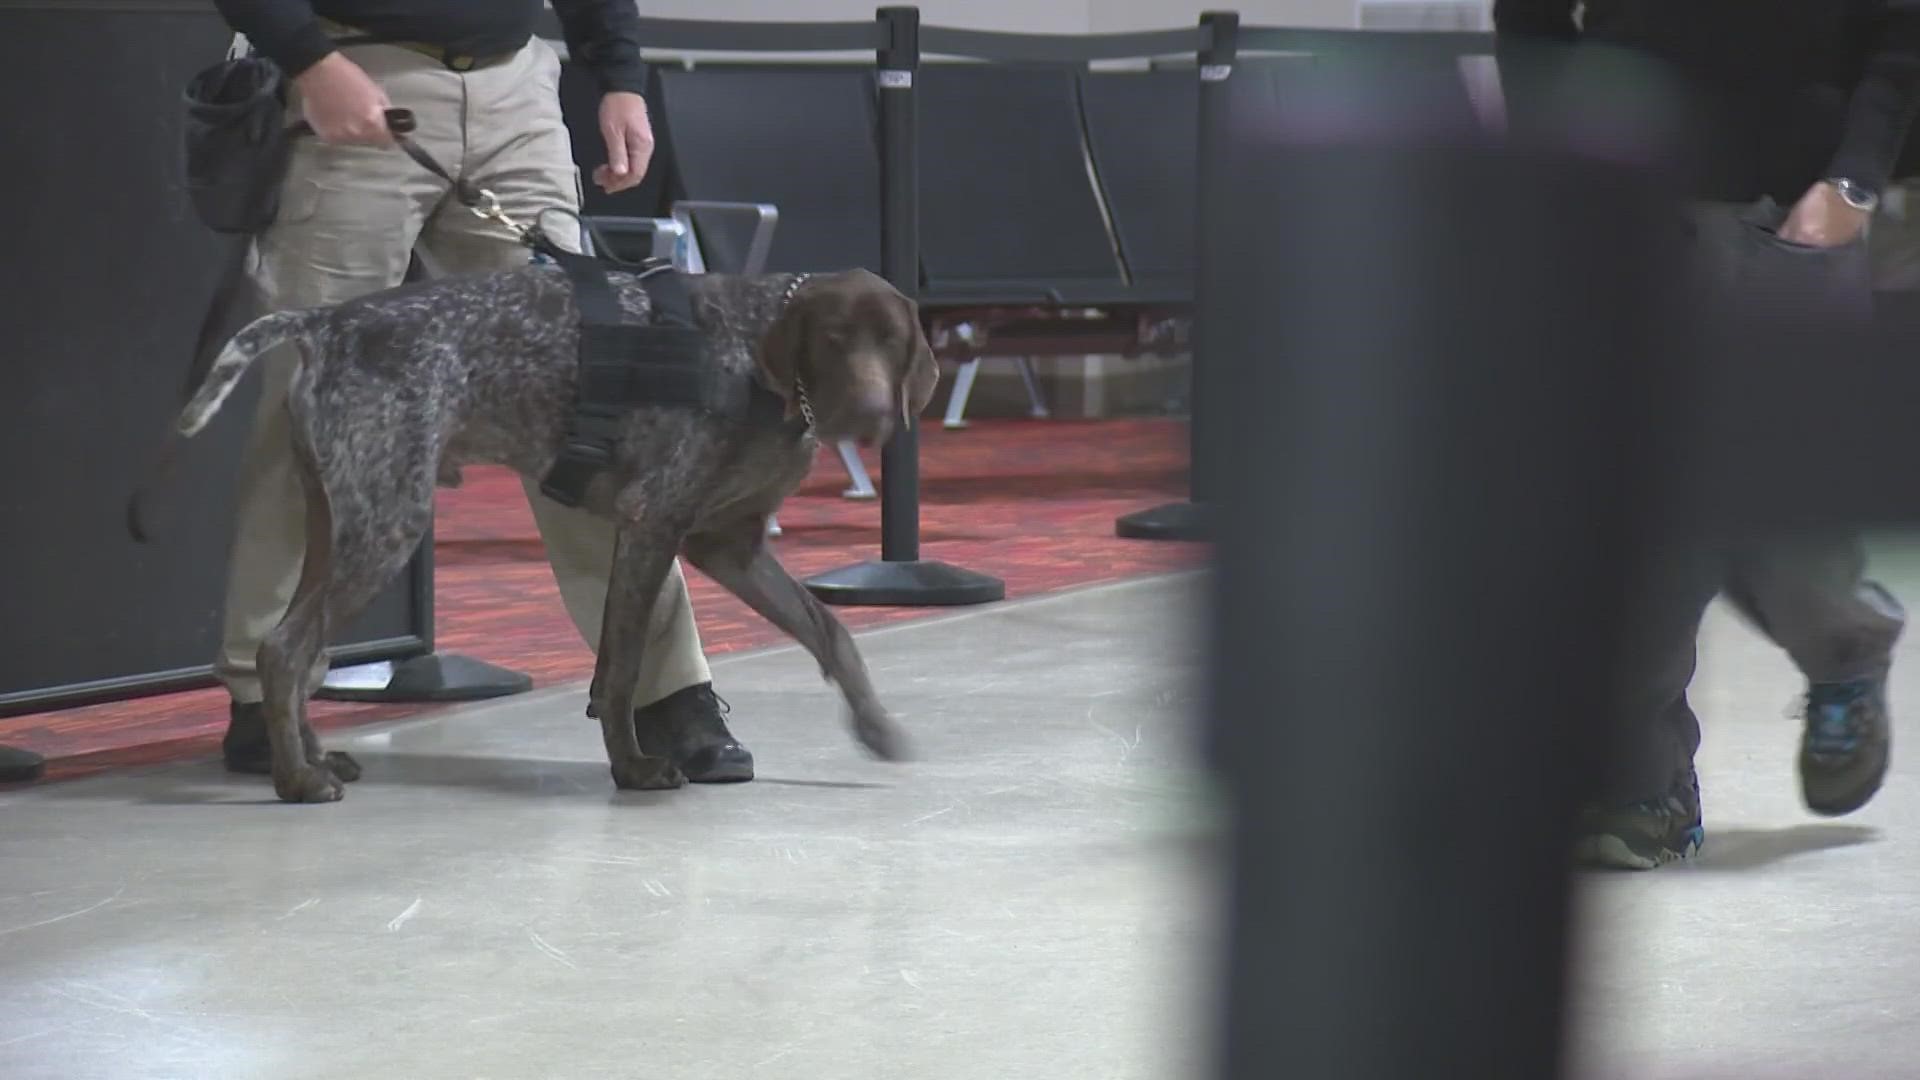 Almost every dog securing State Farm Stadium learned to detect explosives at JBSA Lackland.